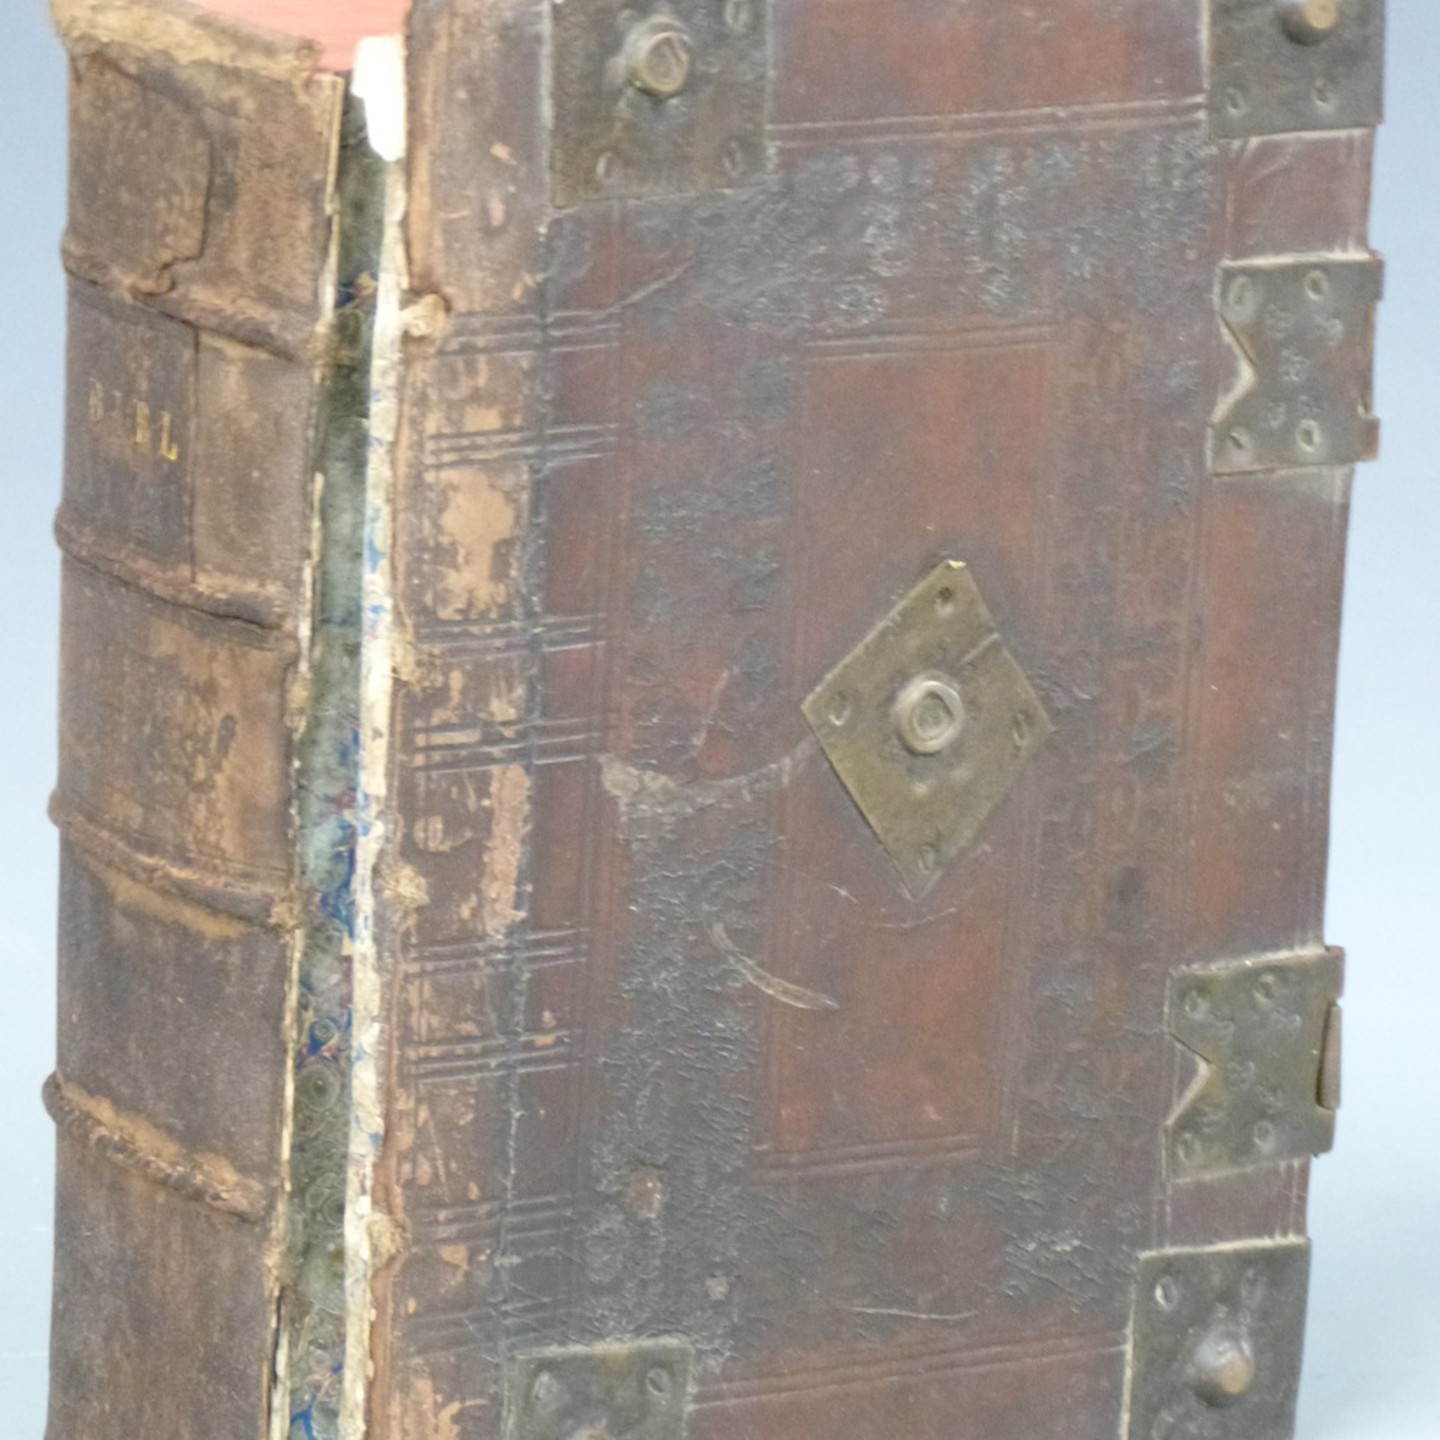 The Booke Of Common Prayer, With The Psalter Or Psalmes Of David, Of Their Translation Imprinted At London By Robert Barker Printer To The Kings Most Excellent Majestie 1607 HAMMER £1200